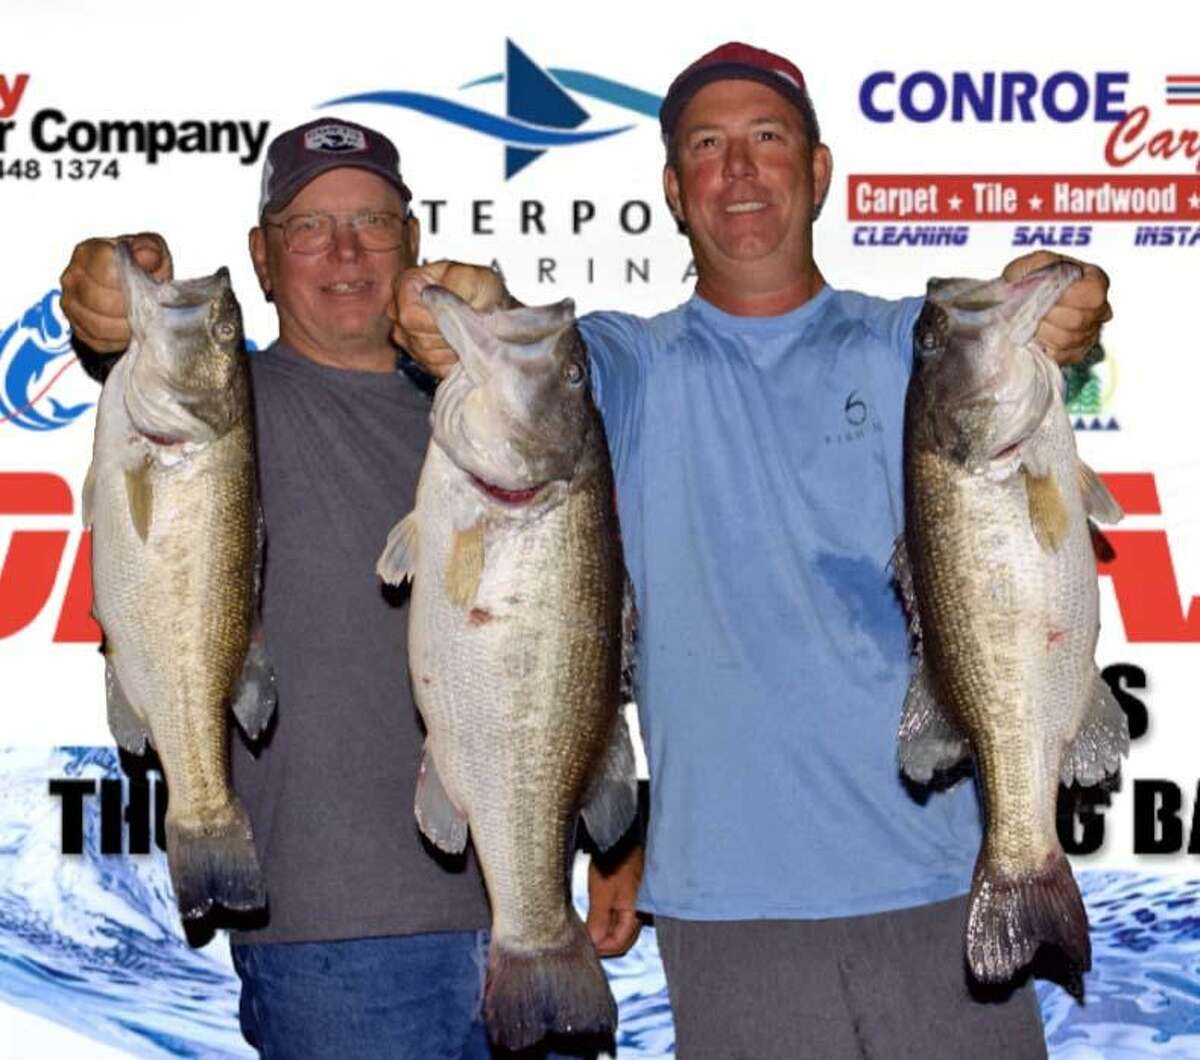 David Bozarth and Russell Cecil came in first place in the CONROEBASS Tuesday Tournament with a stringer weight of 22.60 pounds.  They also had big bass for the tournament weighing 10.46 pounds.